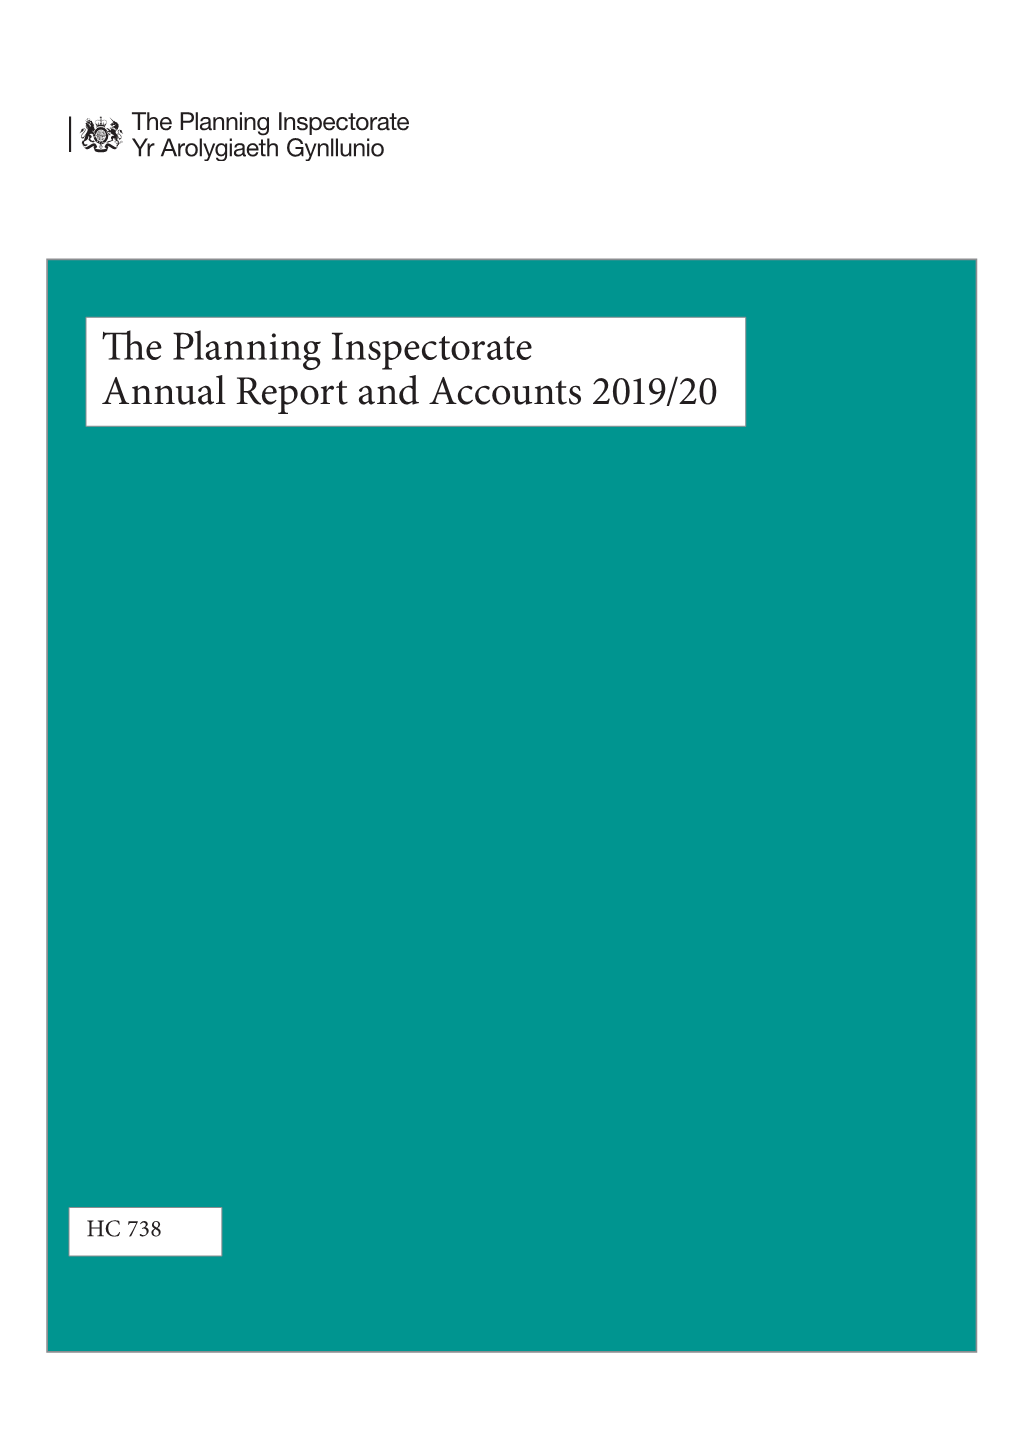 The Planning Inspectorate Annual Report and Accounts 2019/20